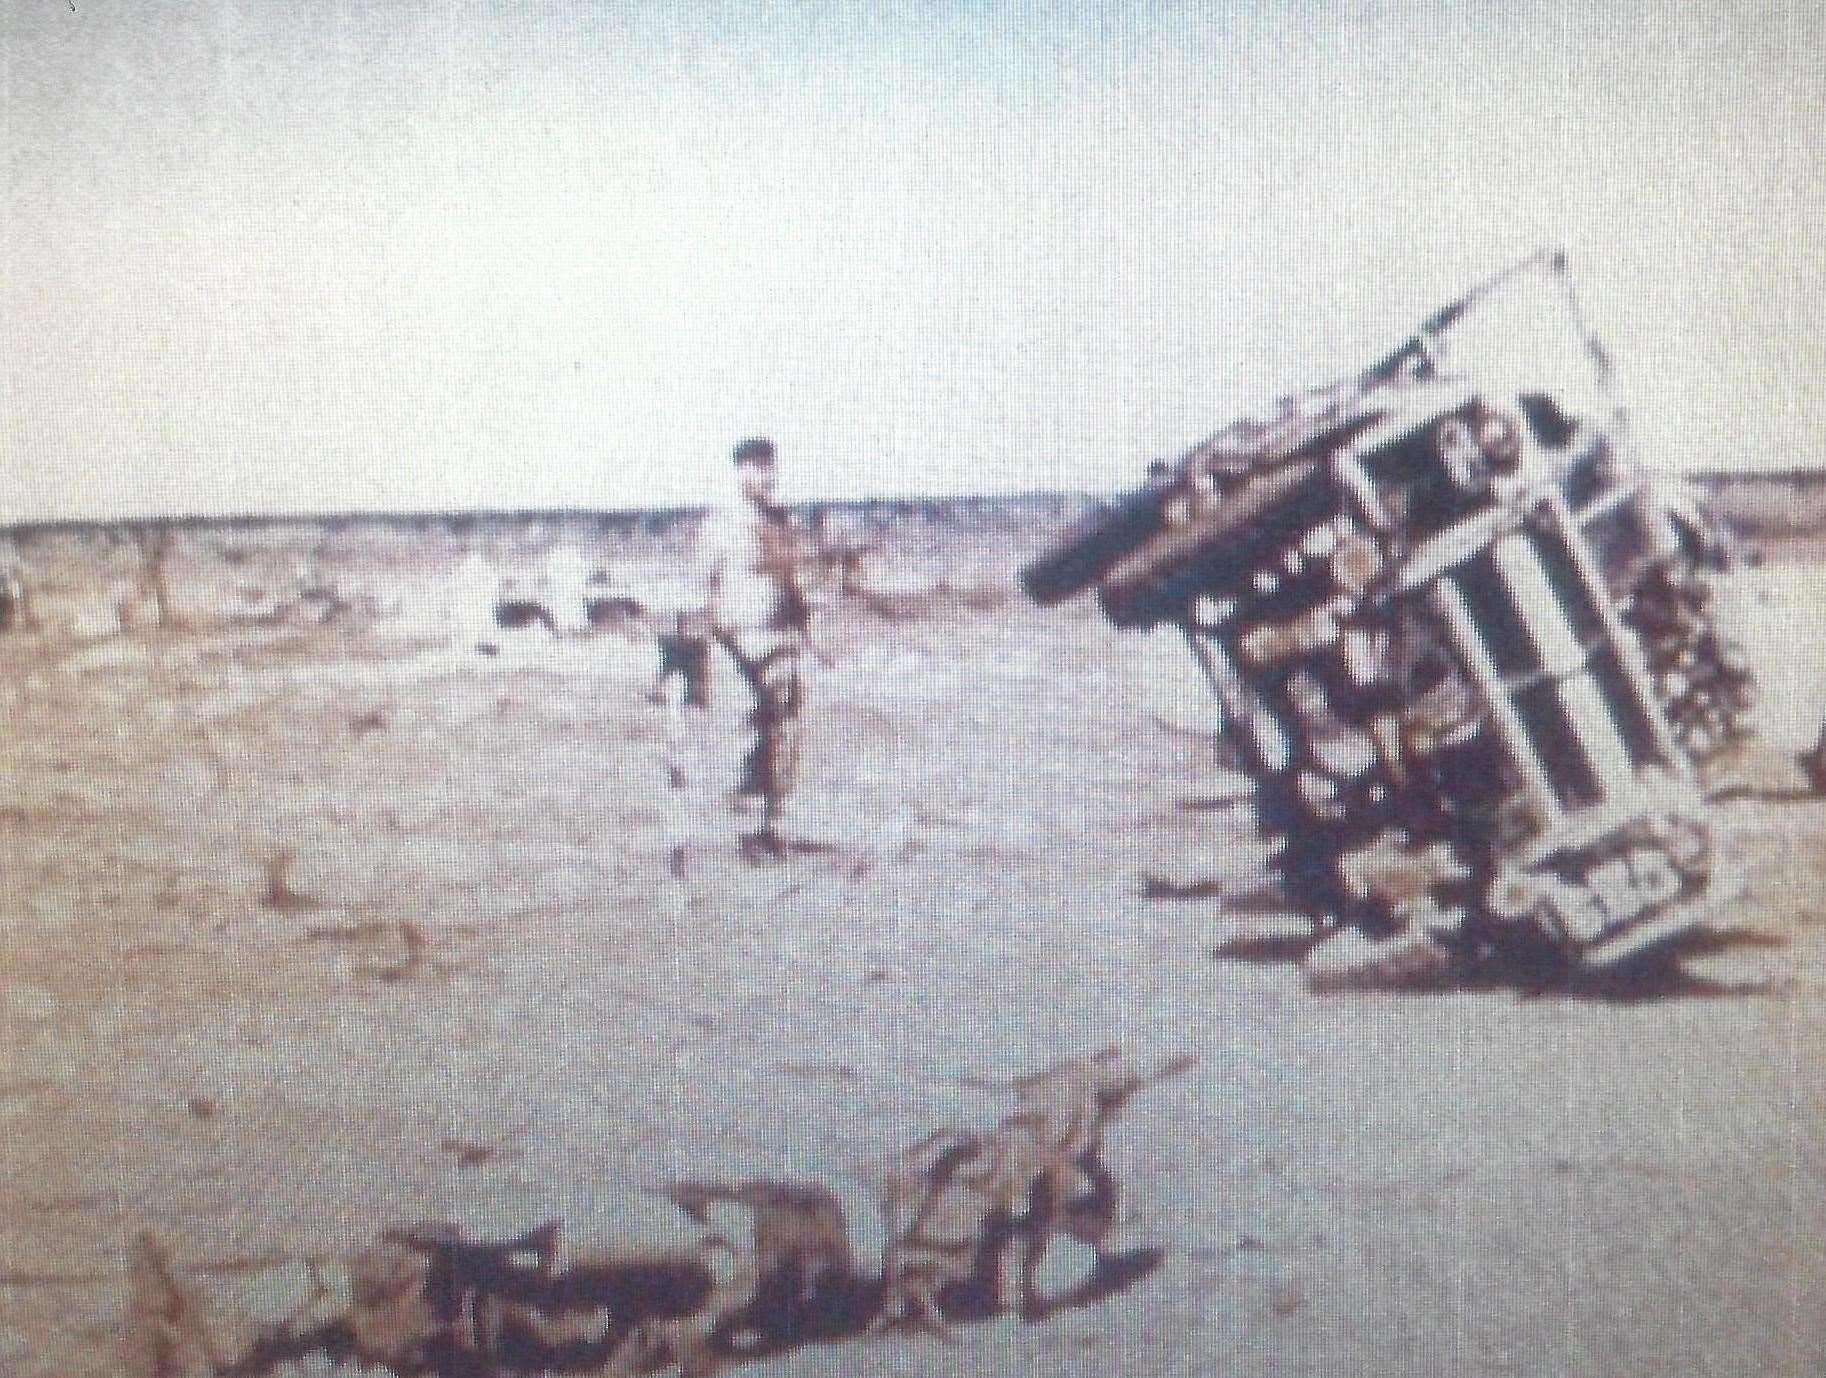 A vehicle tipped over in the blast